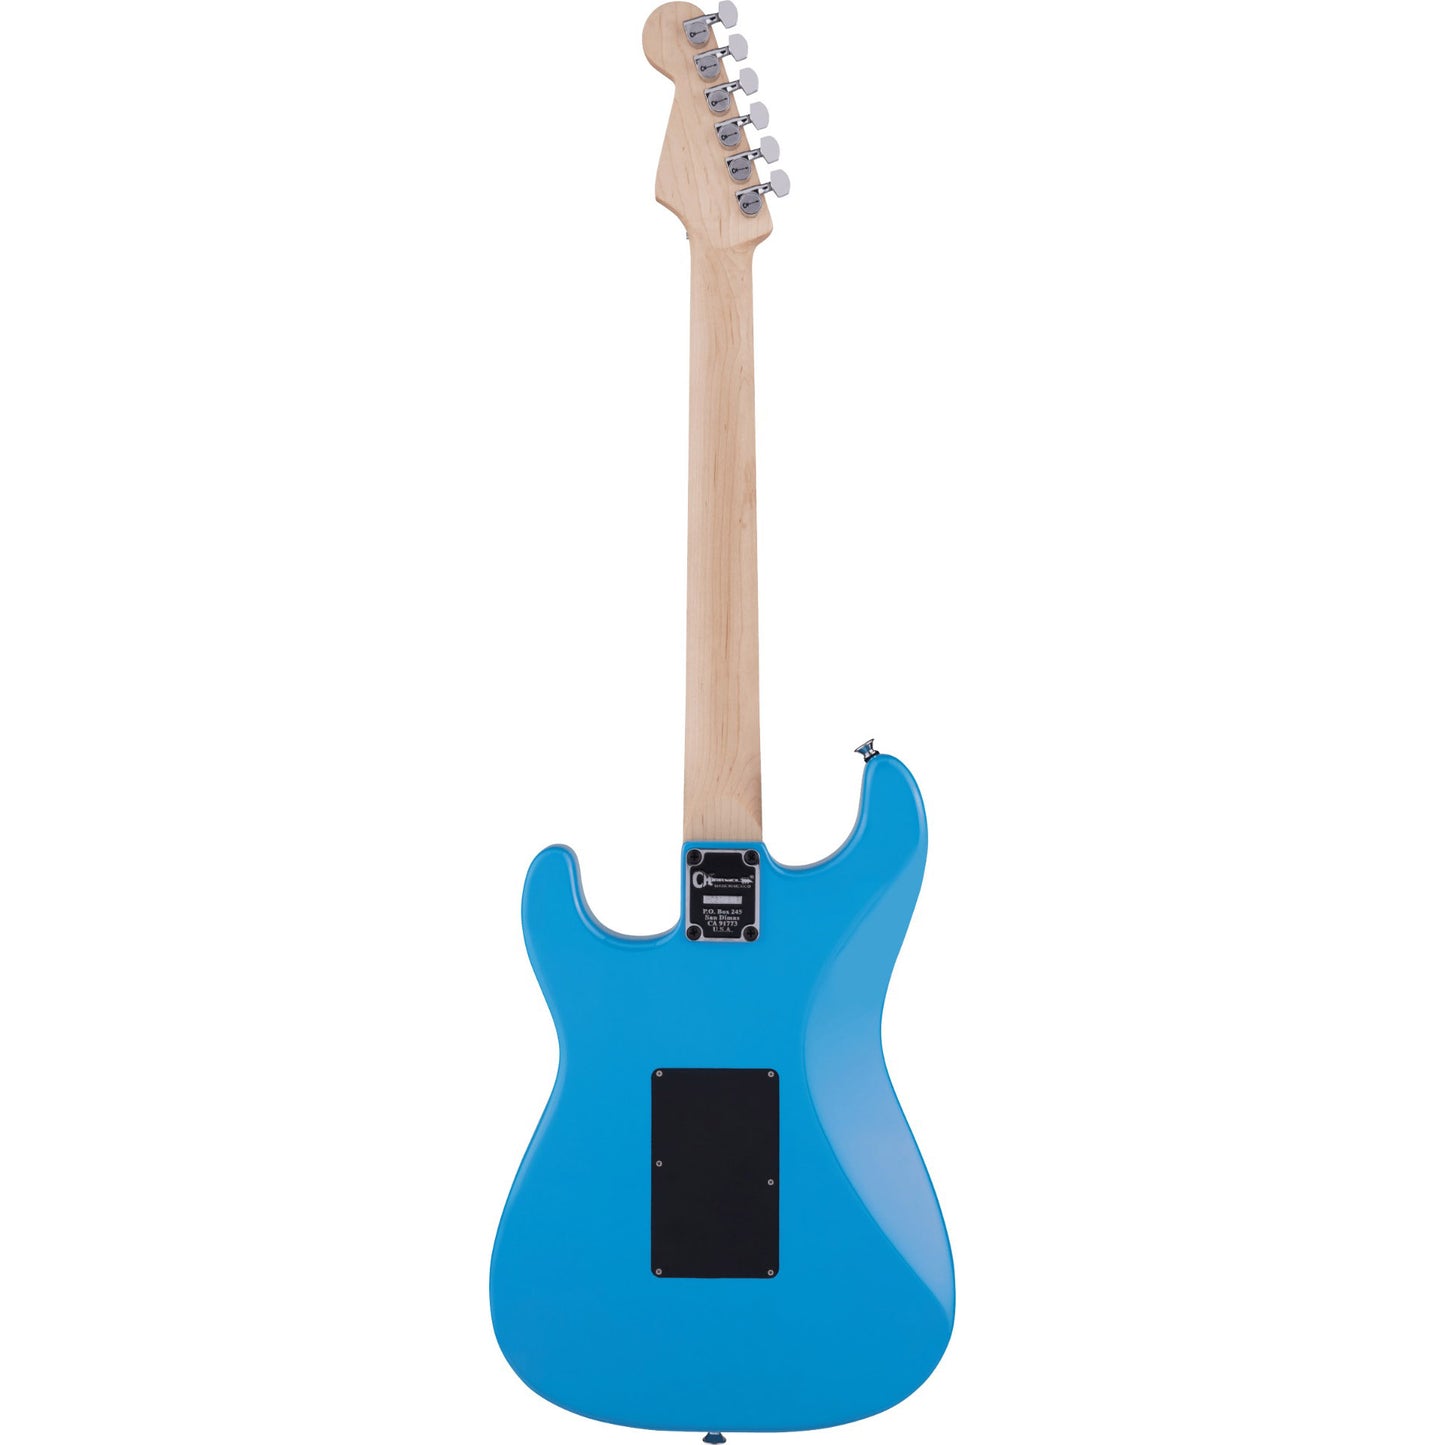 Charvel Pro-Mod So-Cal Style 1 HSH Electric Guitar in Robin’s Egg Blue